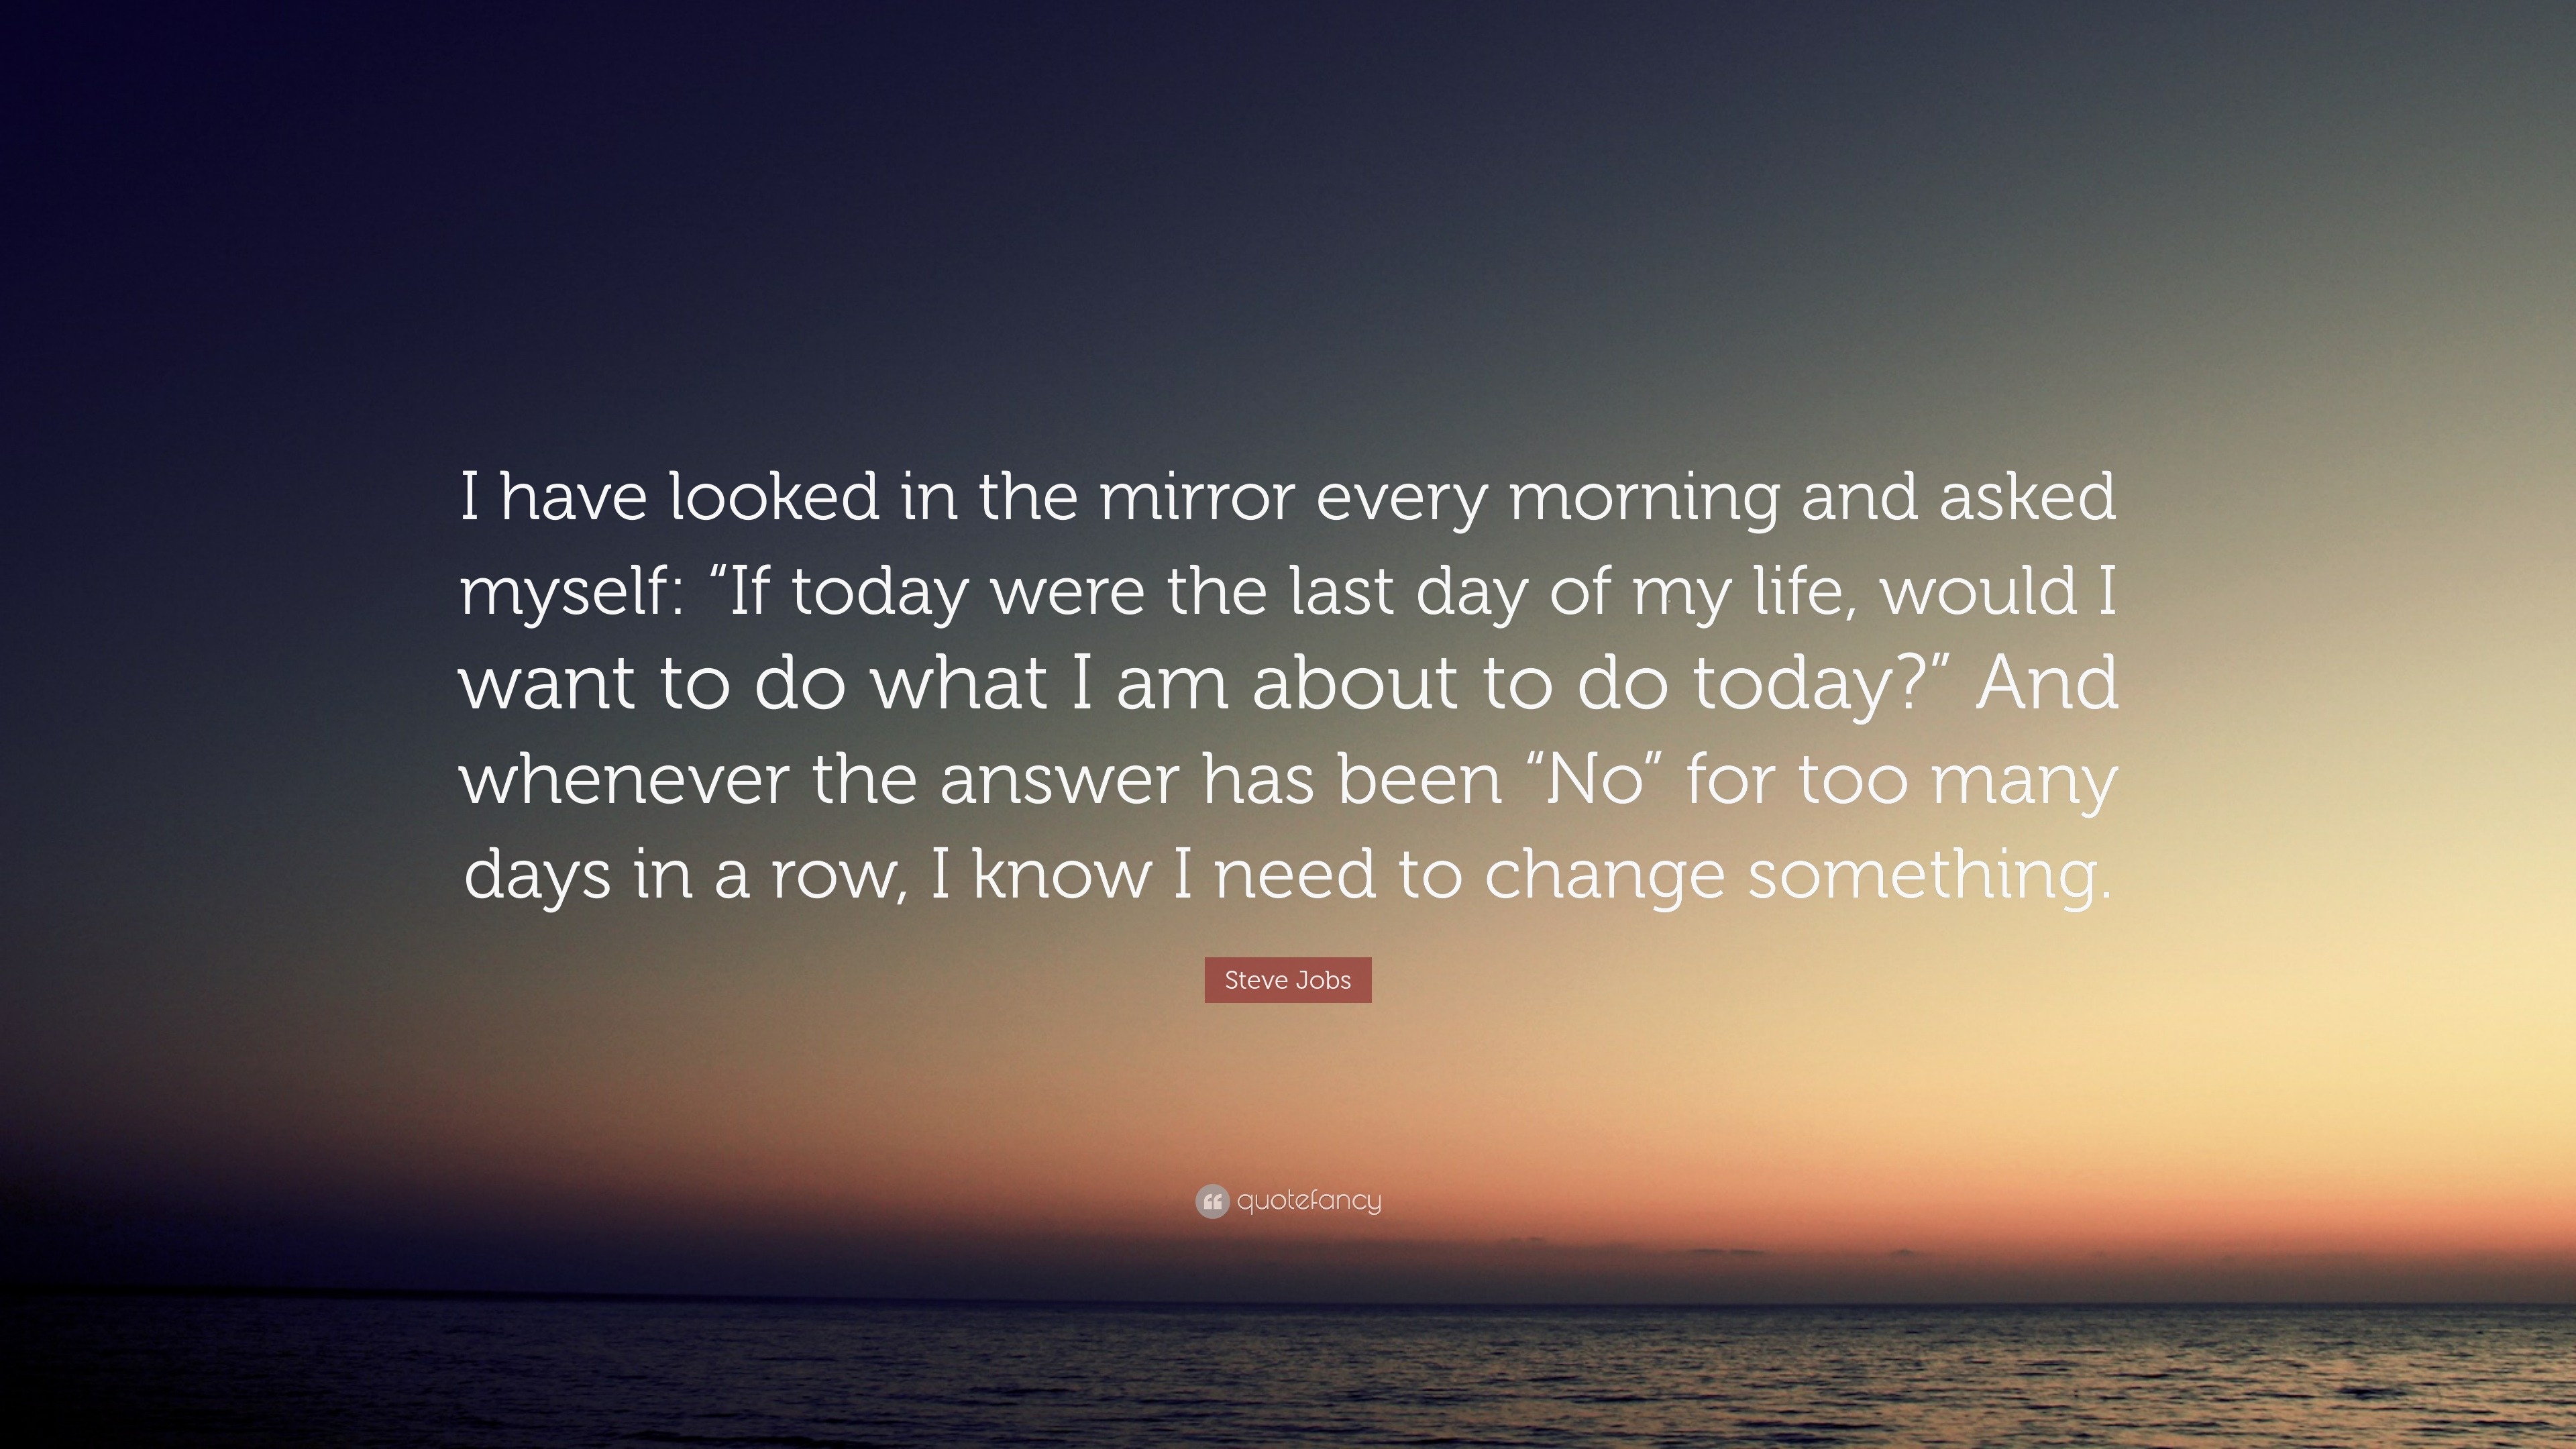 Steve Jobs Quote: “I have looked in the mirror every morning and asked ...